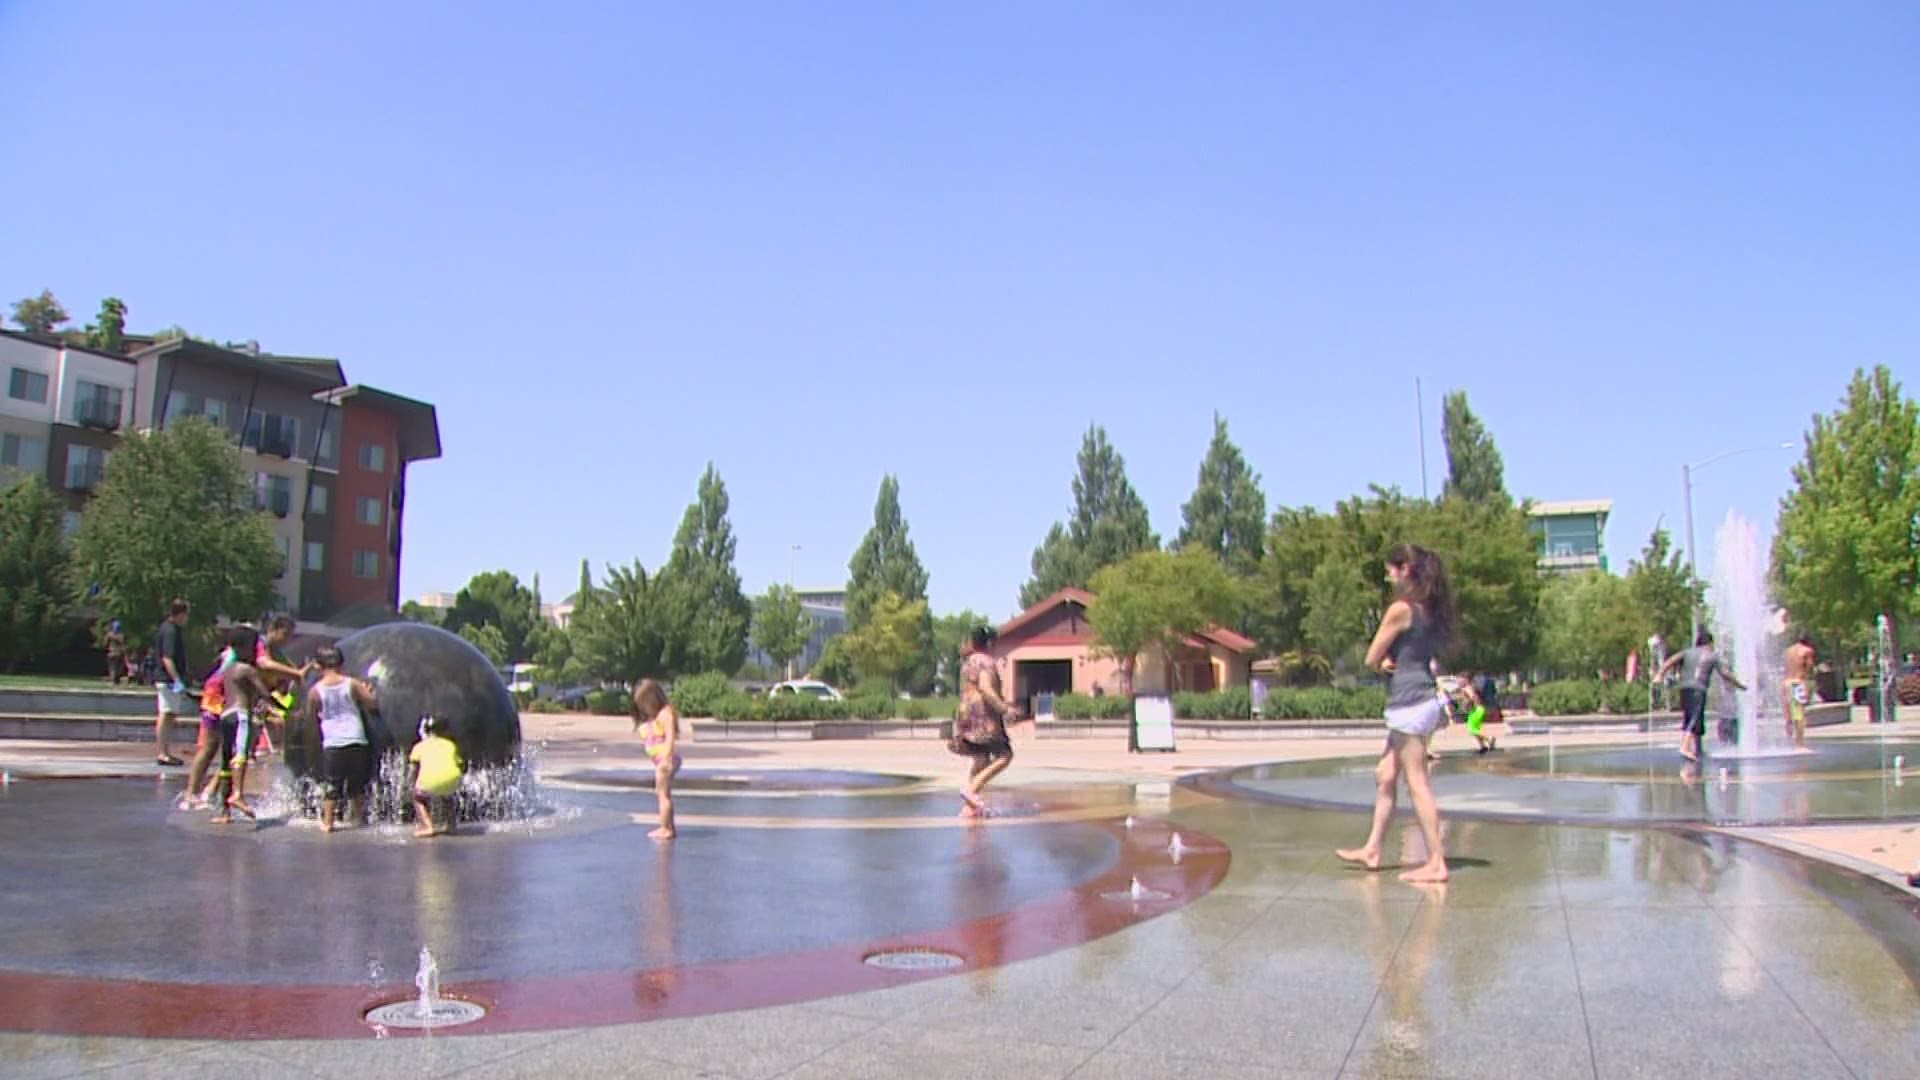 In Kent, the city opened up a splash park and multiple cooling centers, including the Kent Valley Ice Centre, to help people beat the heat.